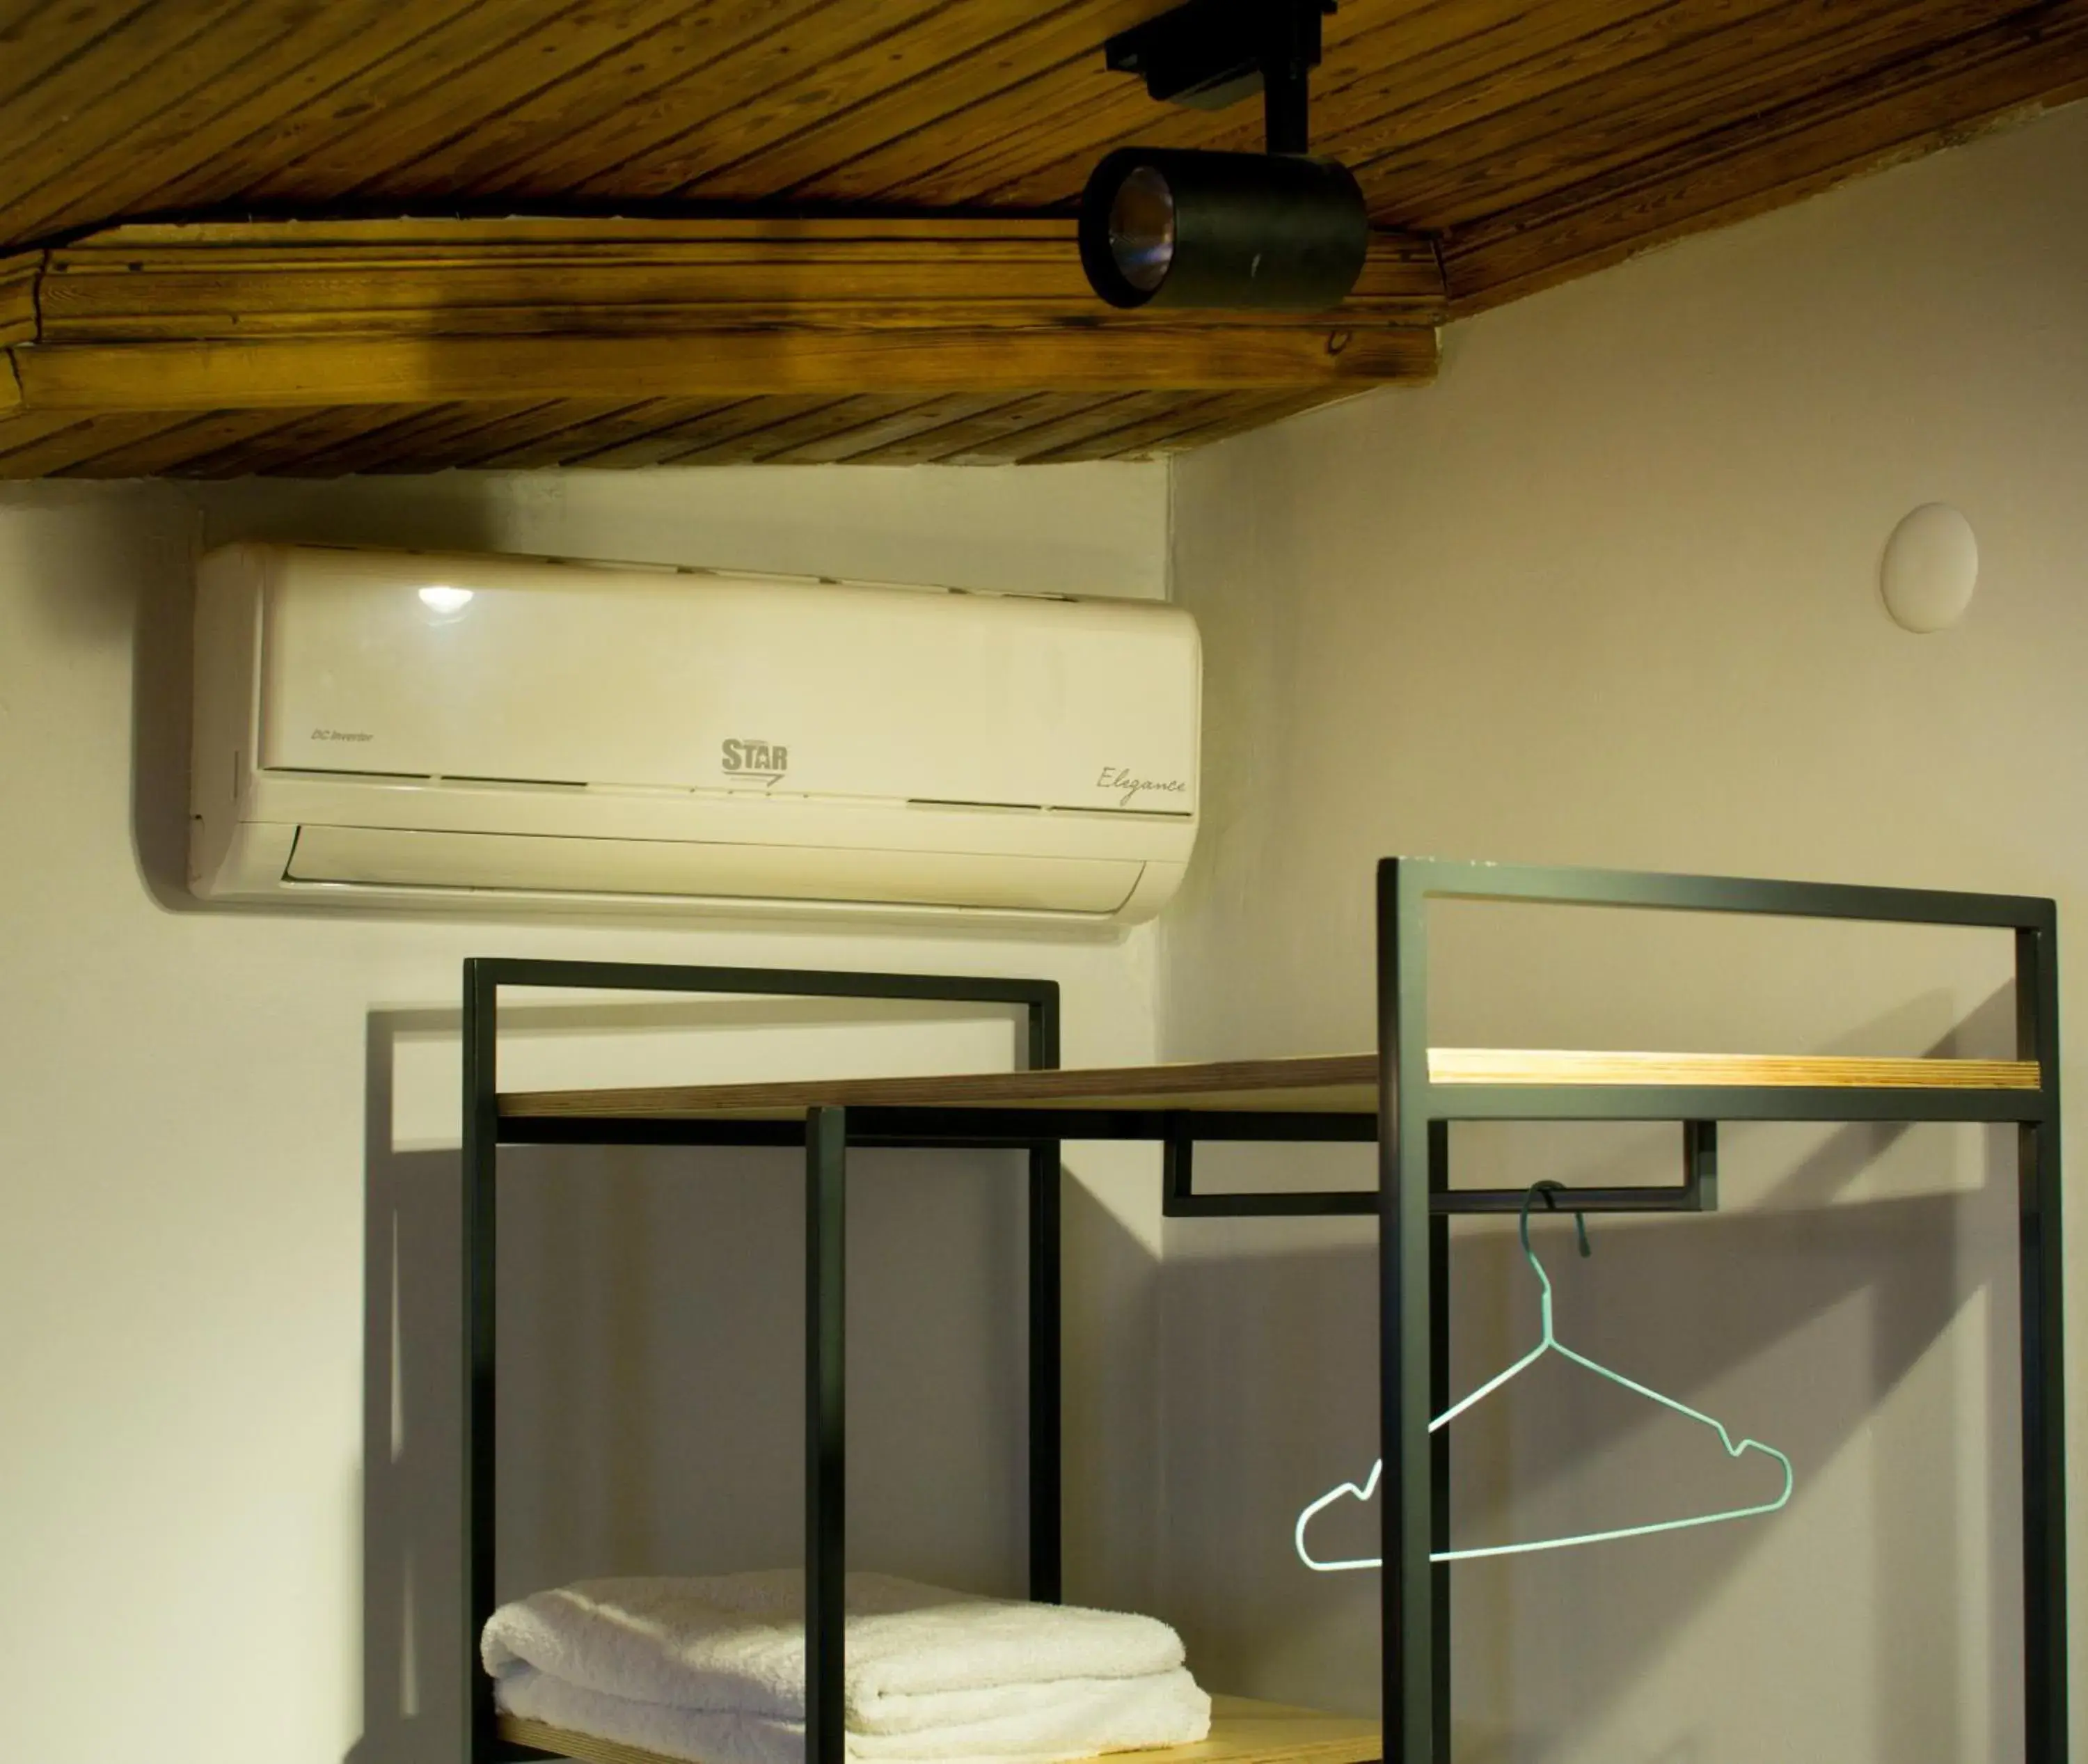 Decorative detail, Bunk Bed in HOT BUDGET